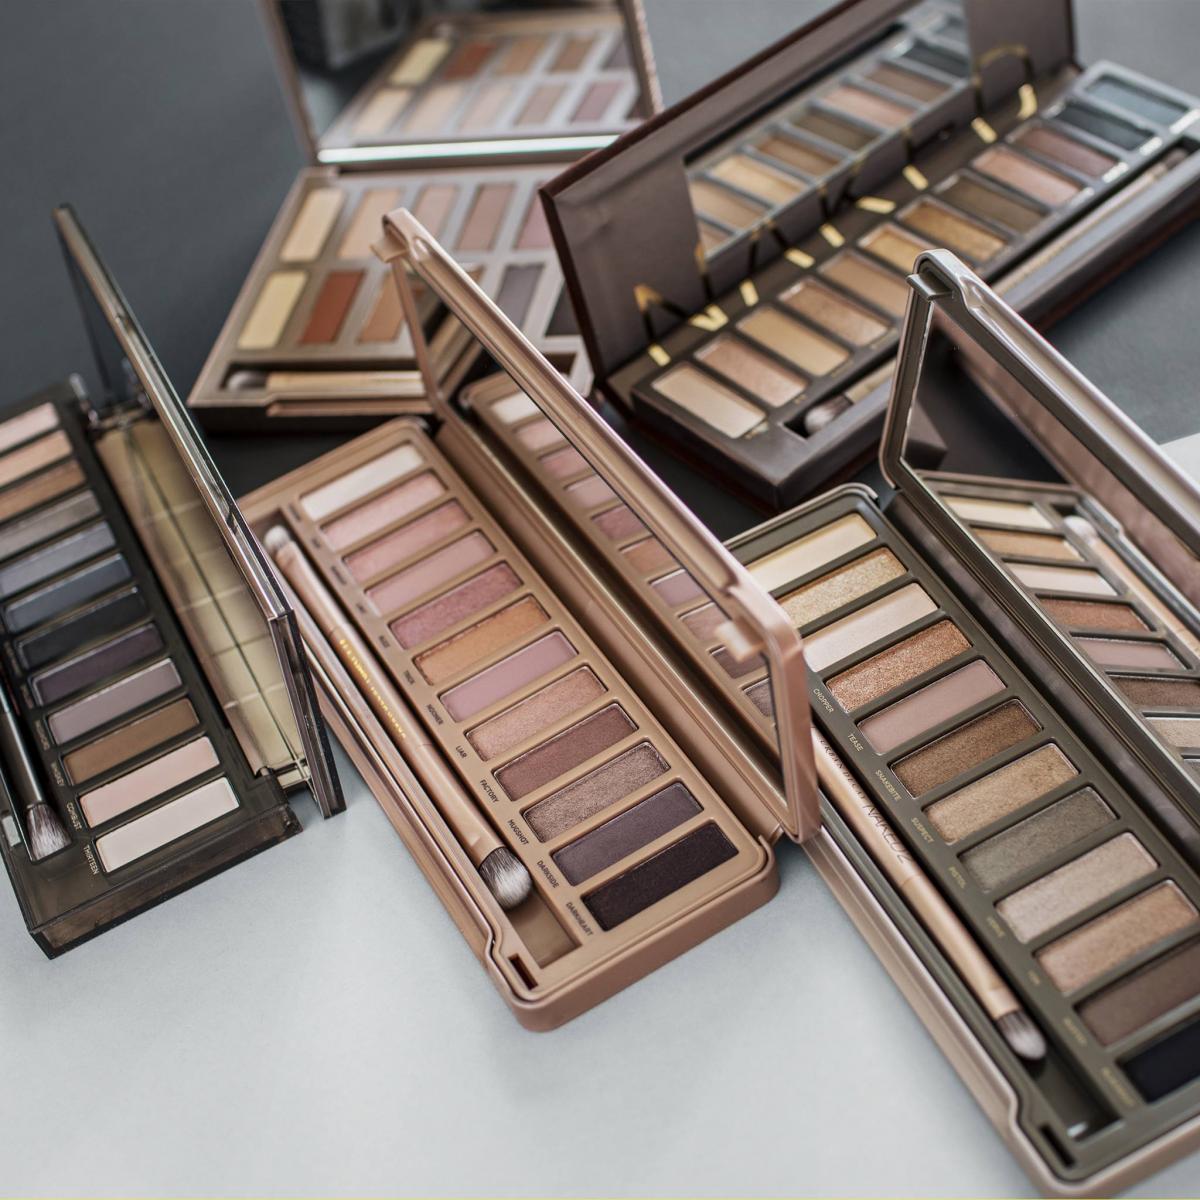 Urban decay naked cruelty free makeup